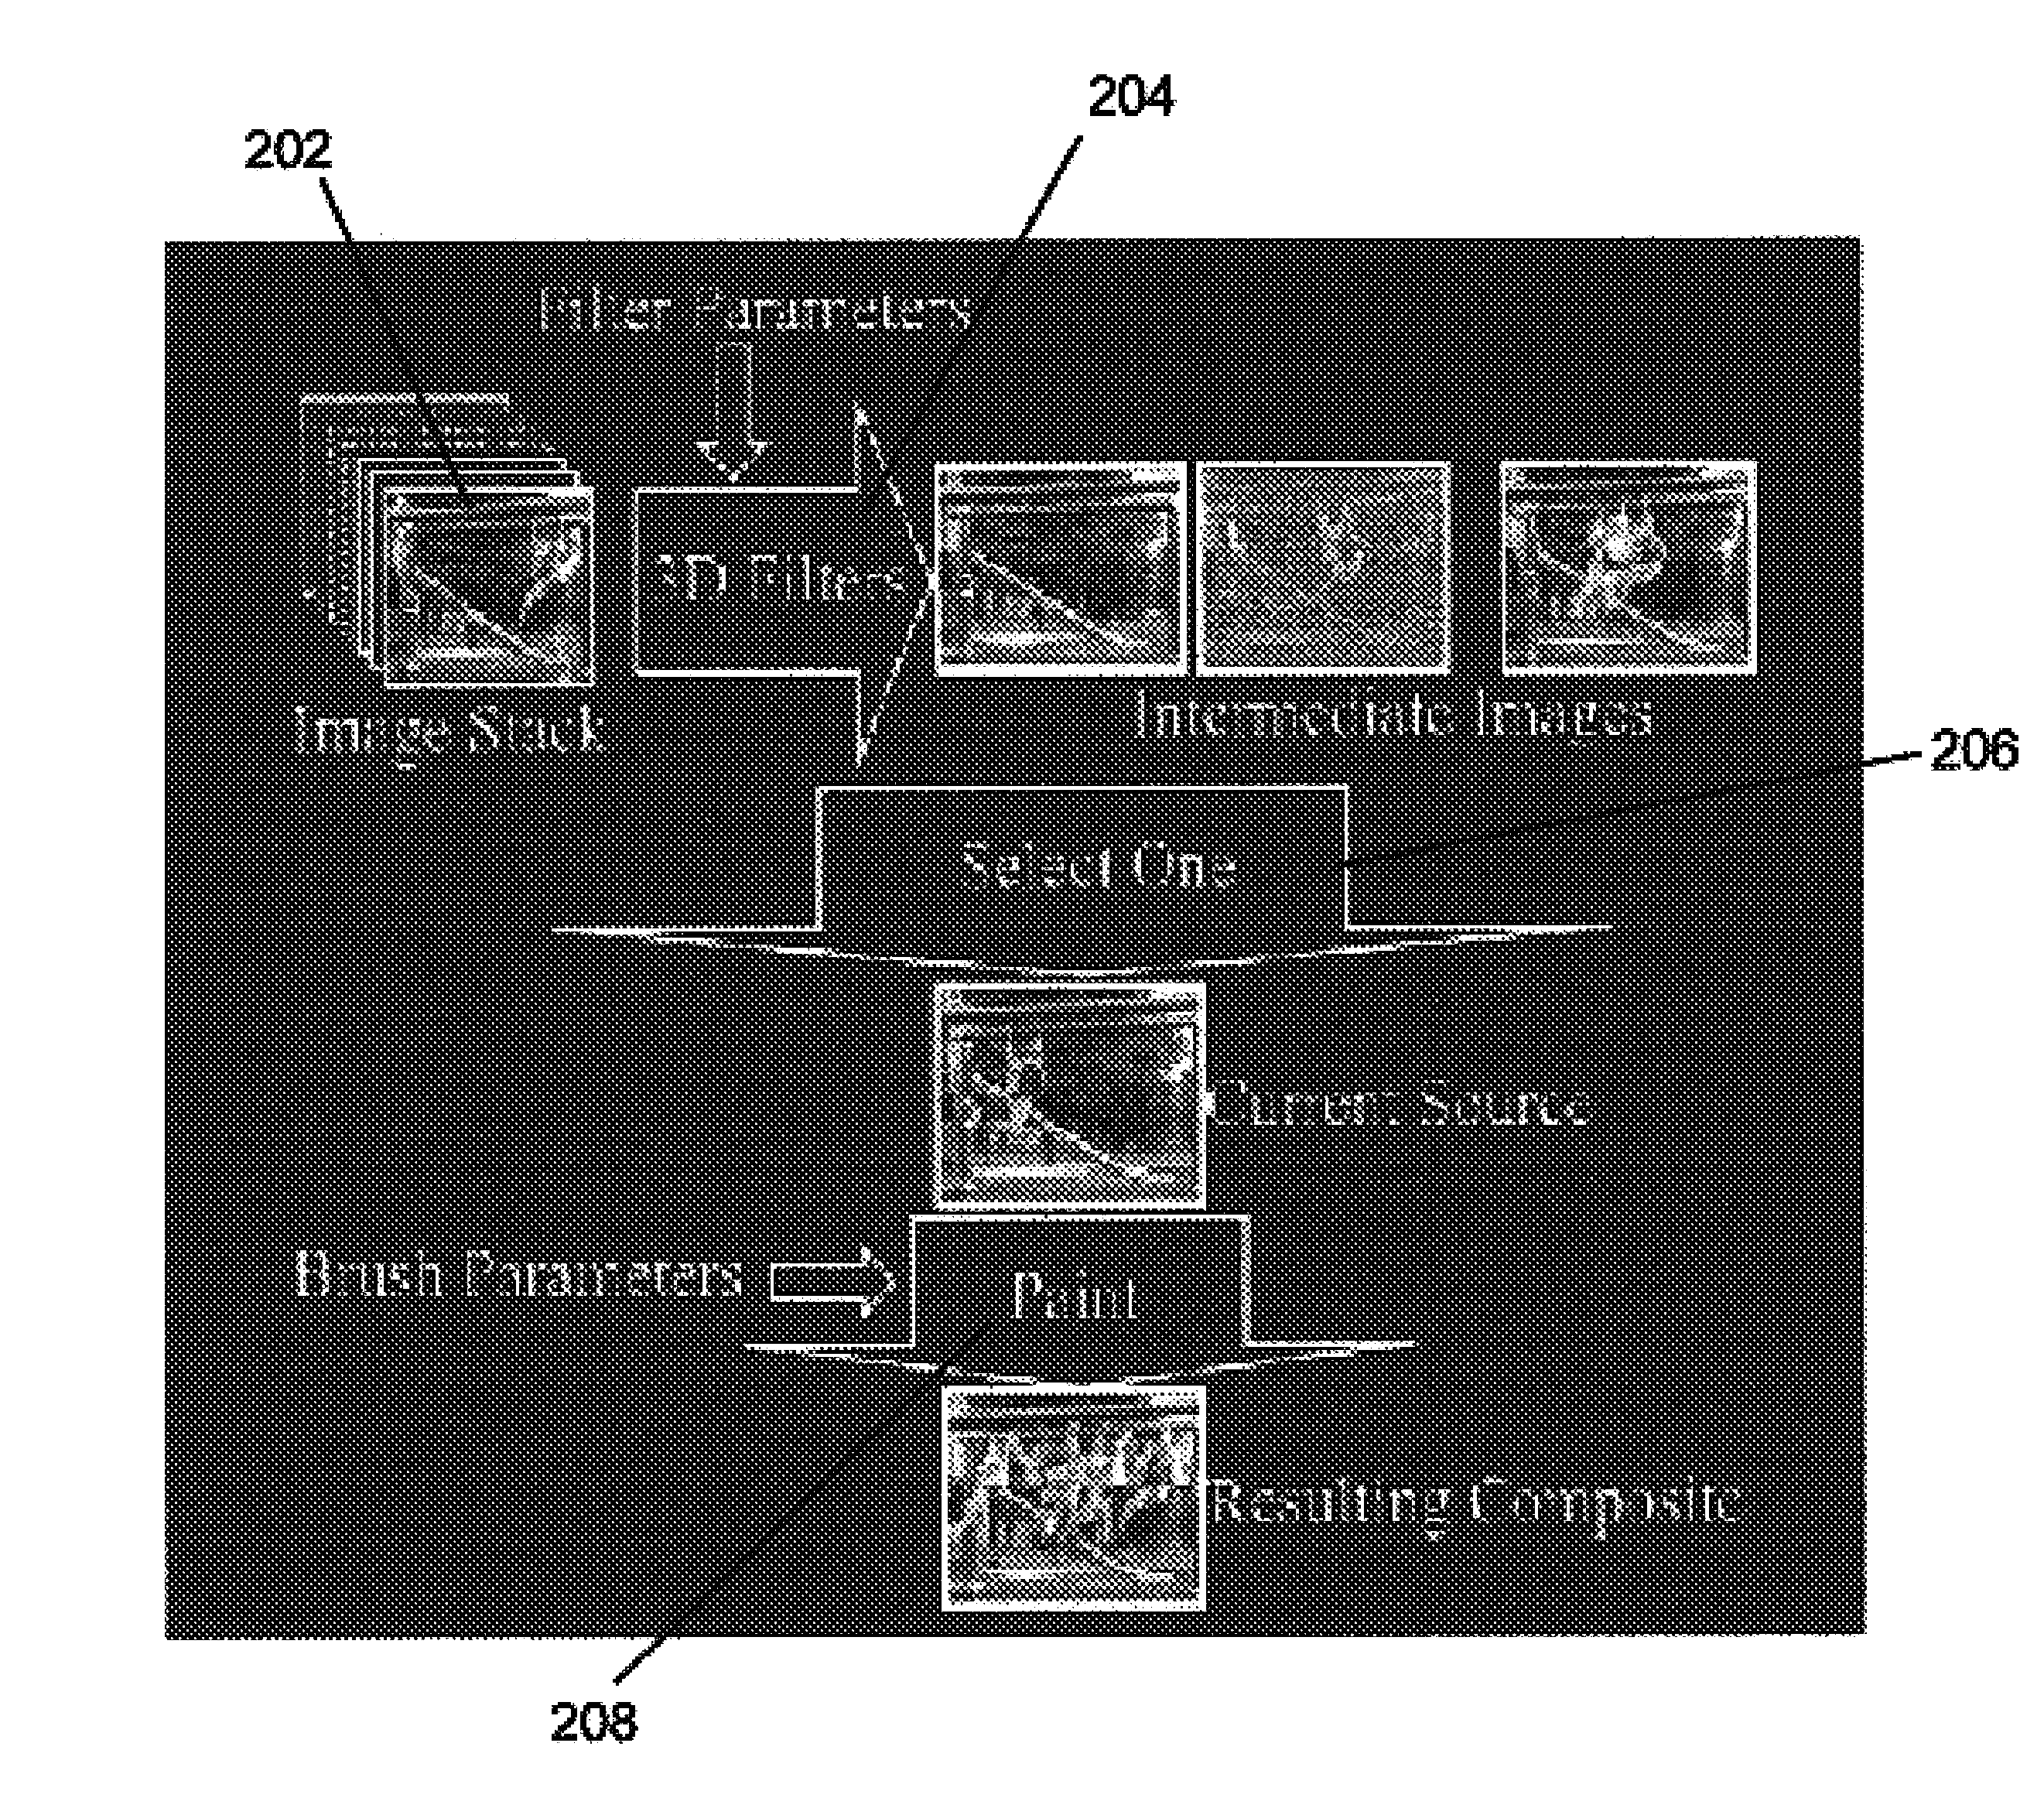 System and method for image editing using an image stack